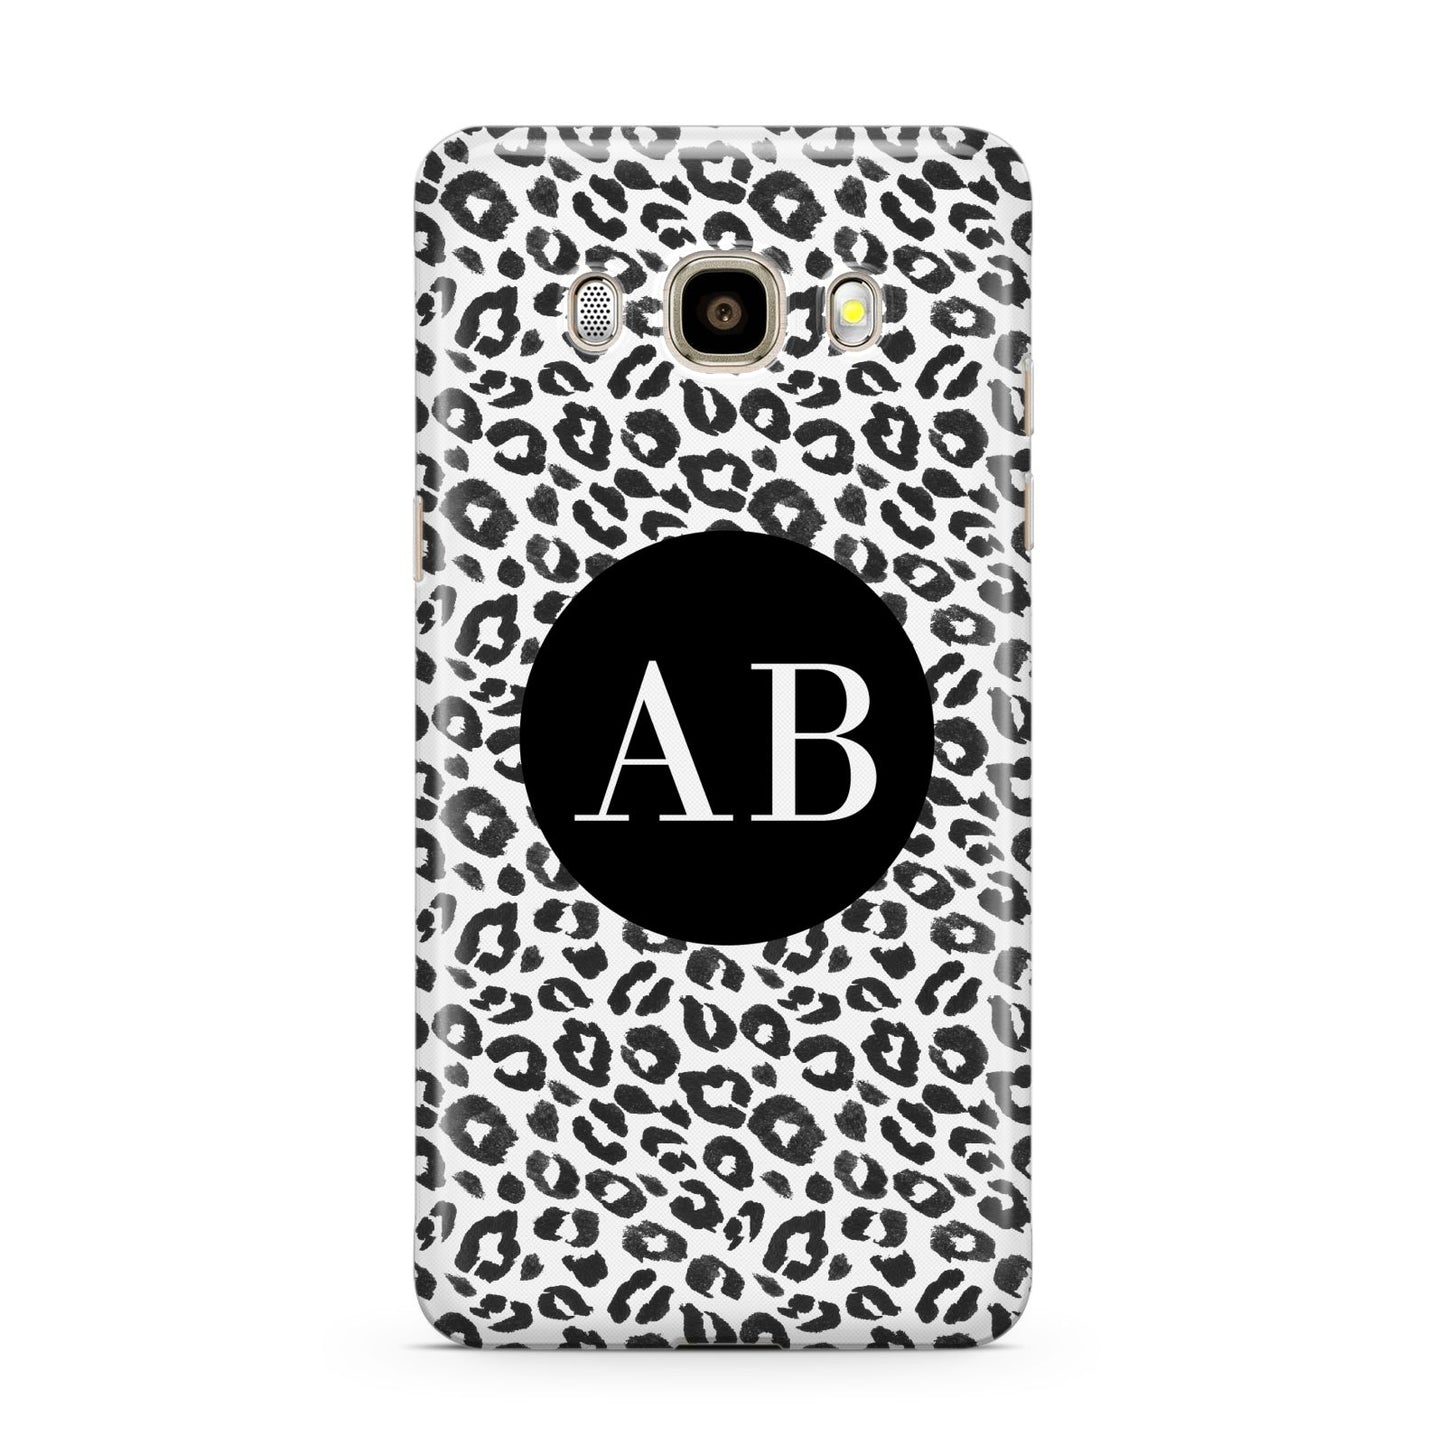 Leopard Print Black and White Samsung Galaxy J7 2016 Case on gold phone